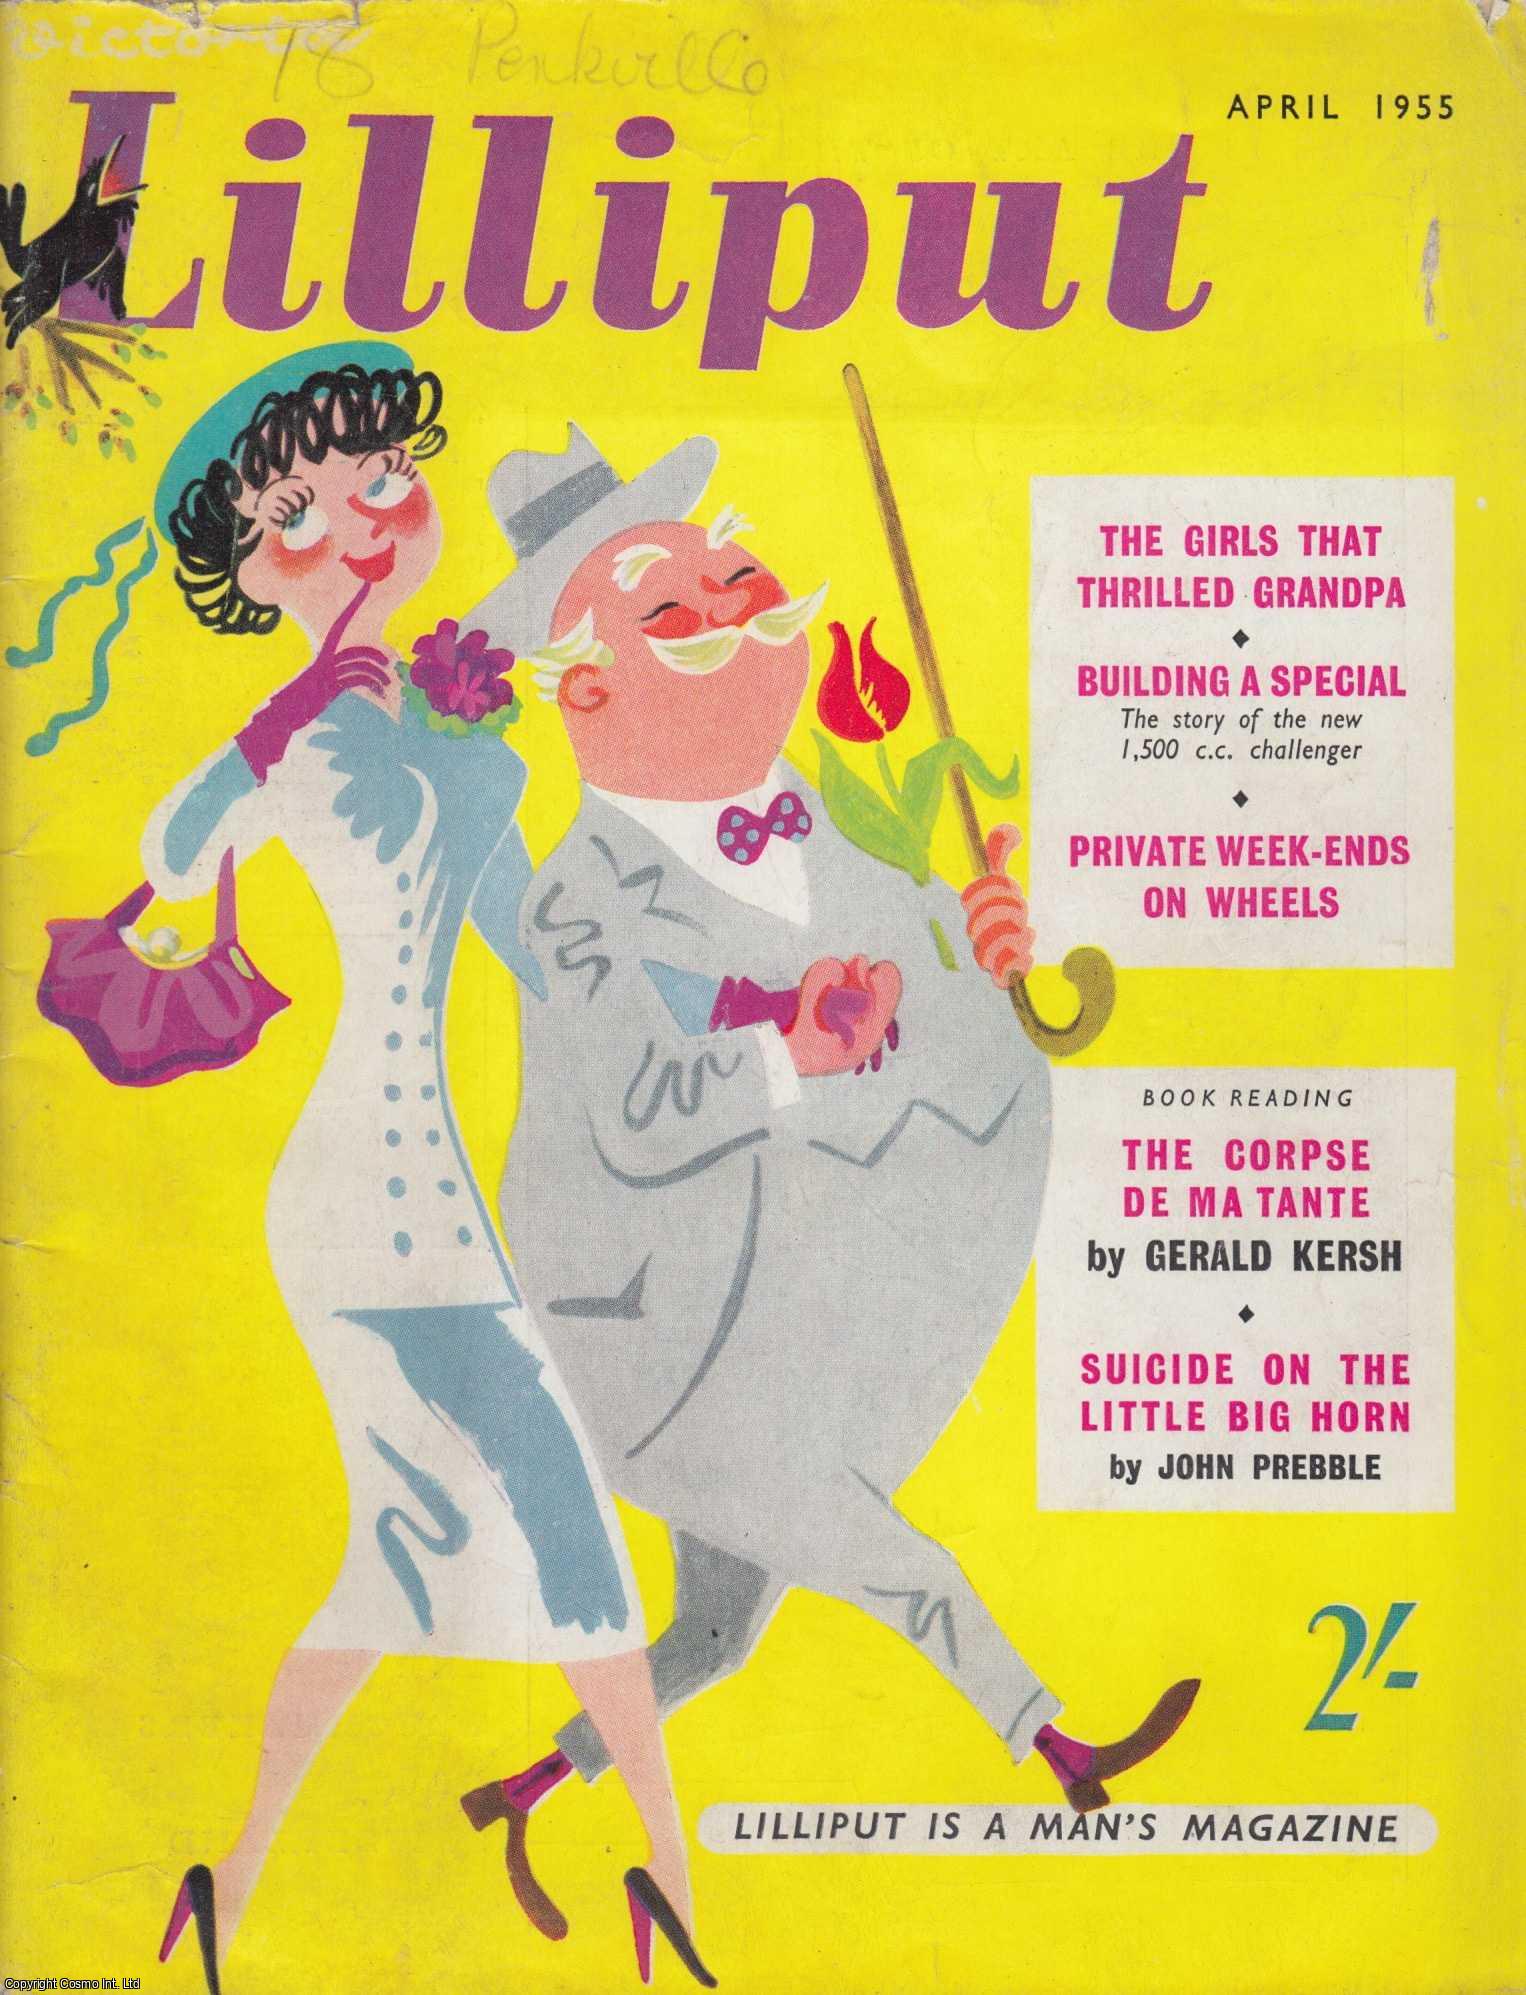 Lilliput - Lilliput Magazine. Apr 1955. Vol.36 no.4 Issue no.214. Suicide on the Little Big Horn, by John Prebble. Illustrated by Raymond Sheppard, and other pieces.